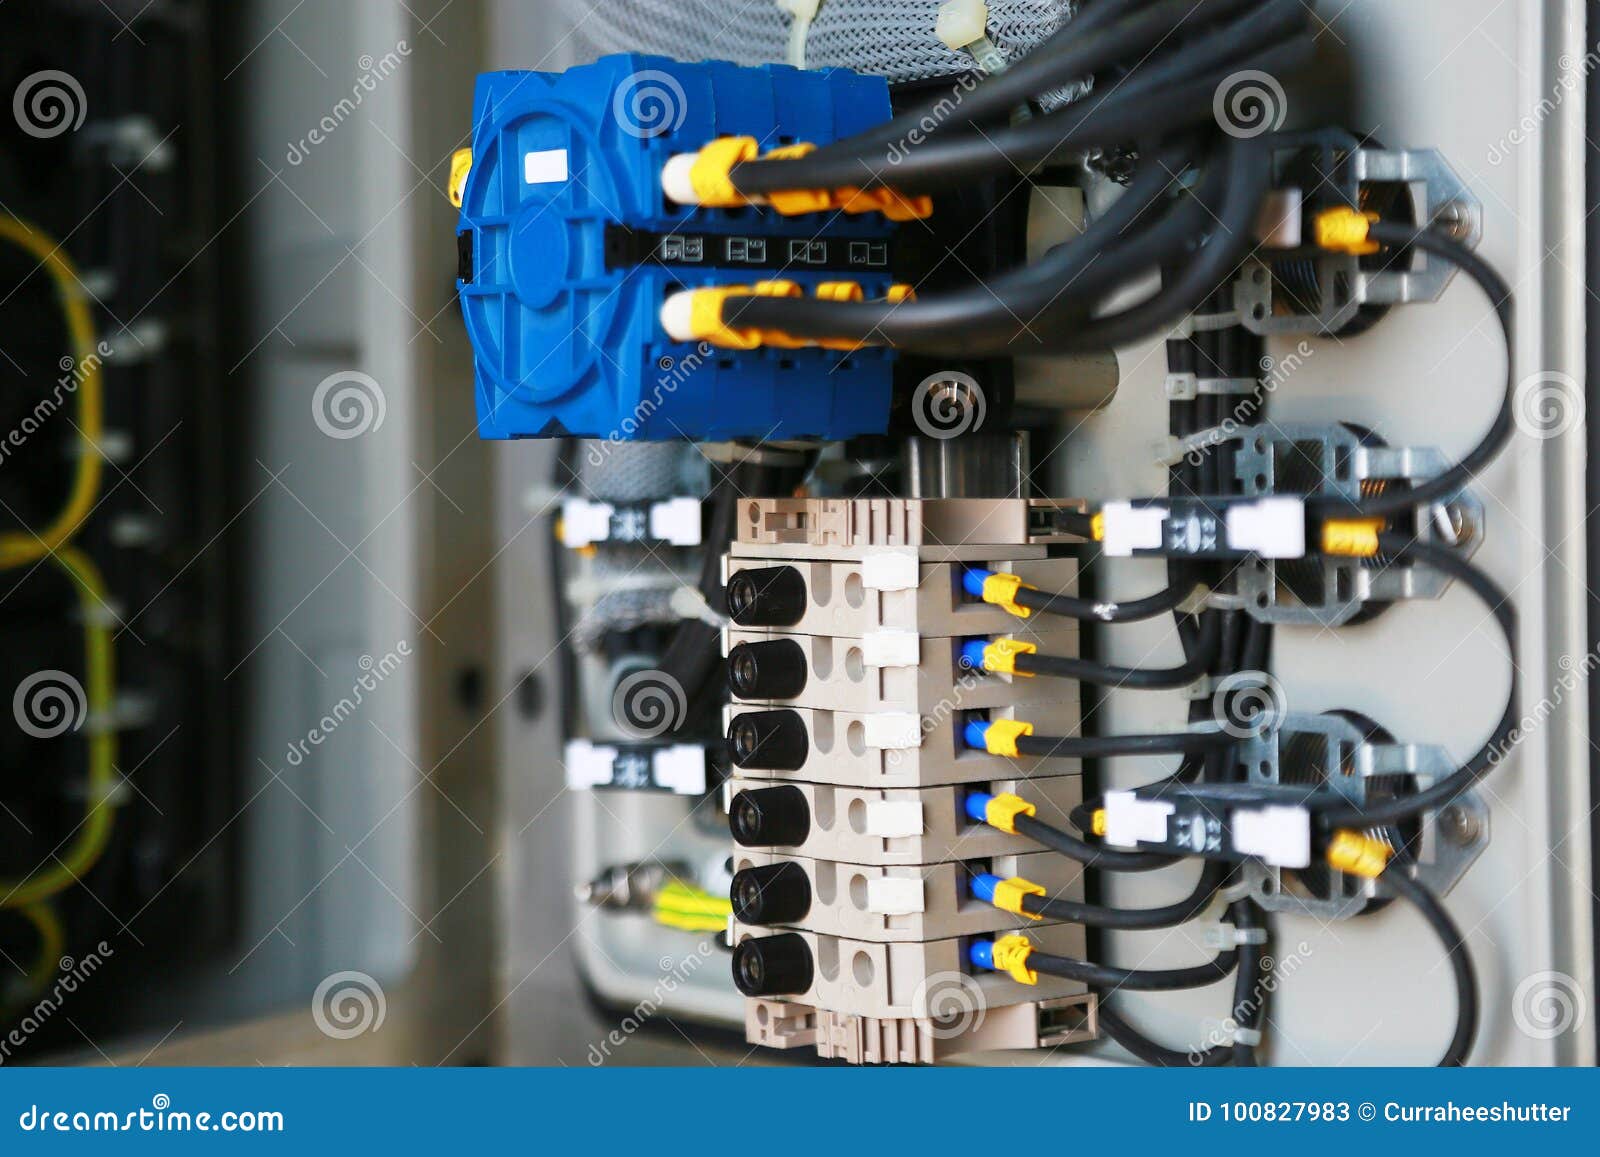 electrical terminal in junction box and service by technician. electrical device install in control panel for support program